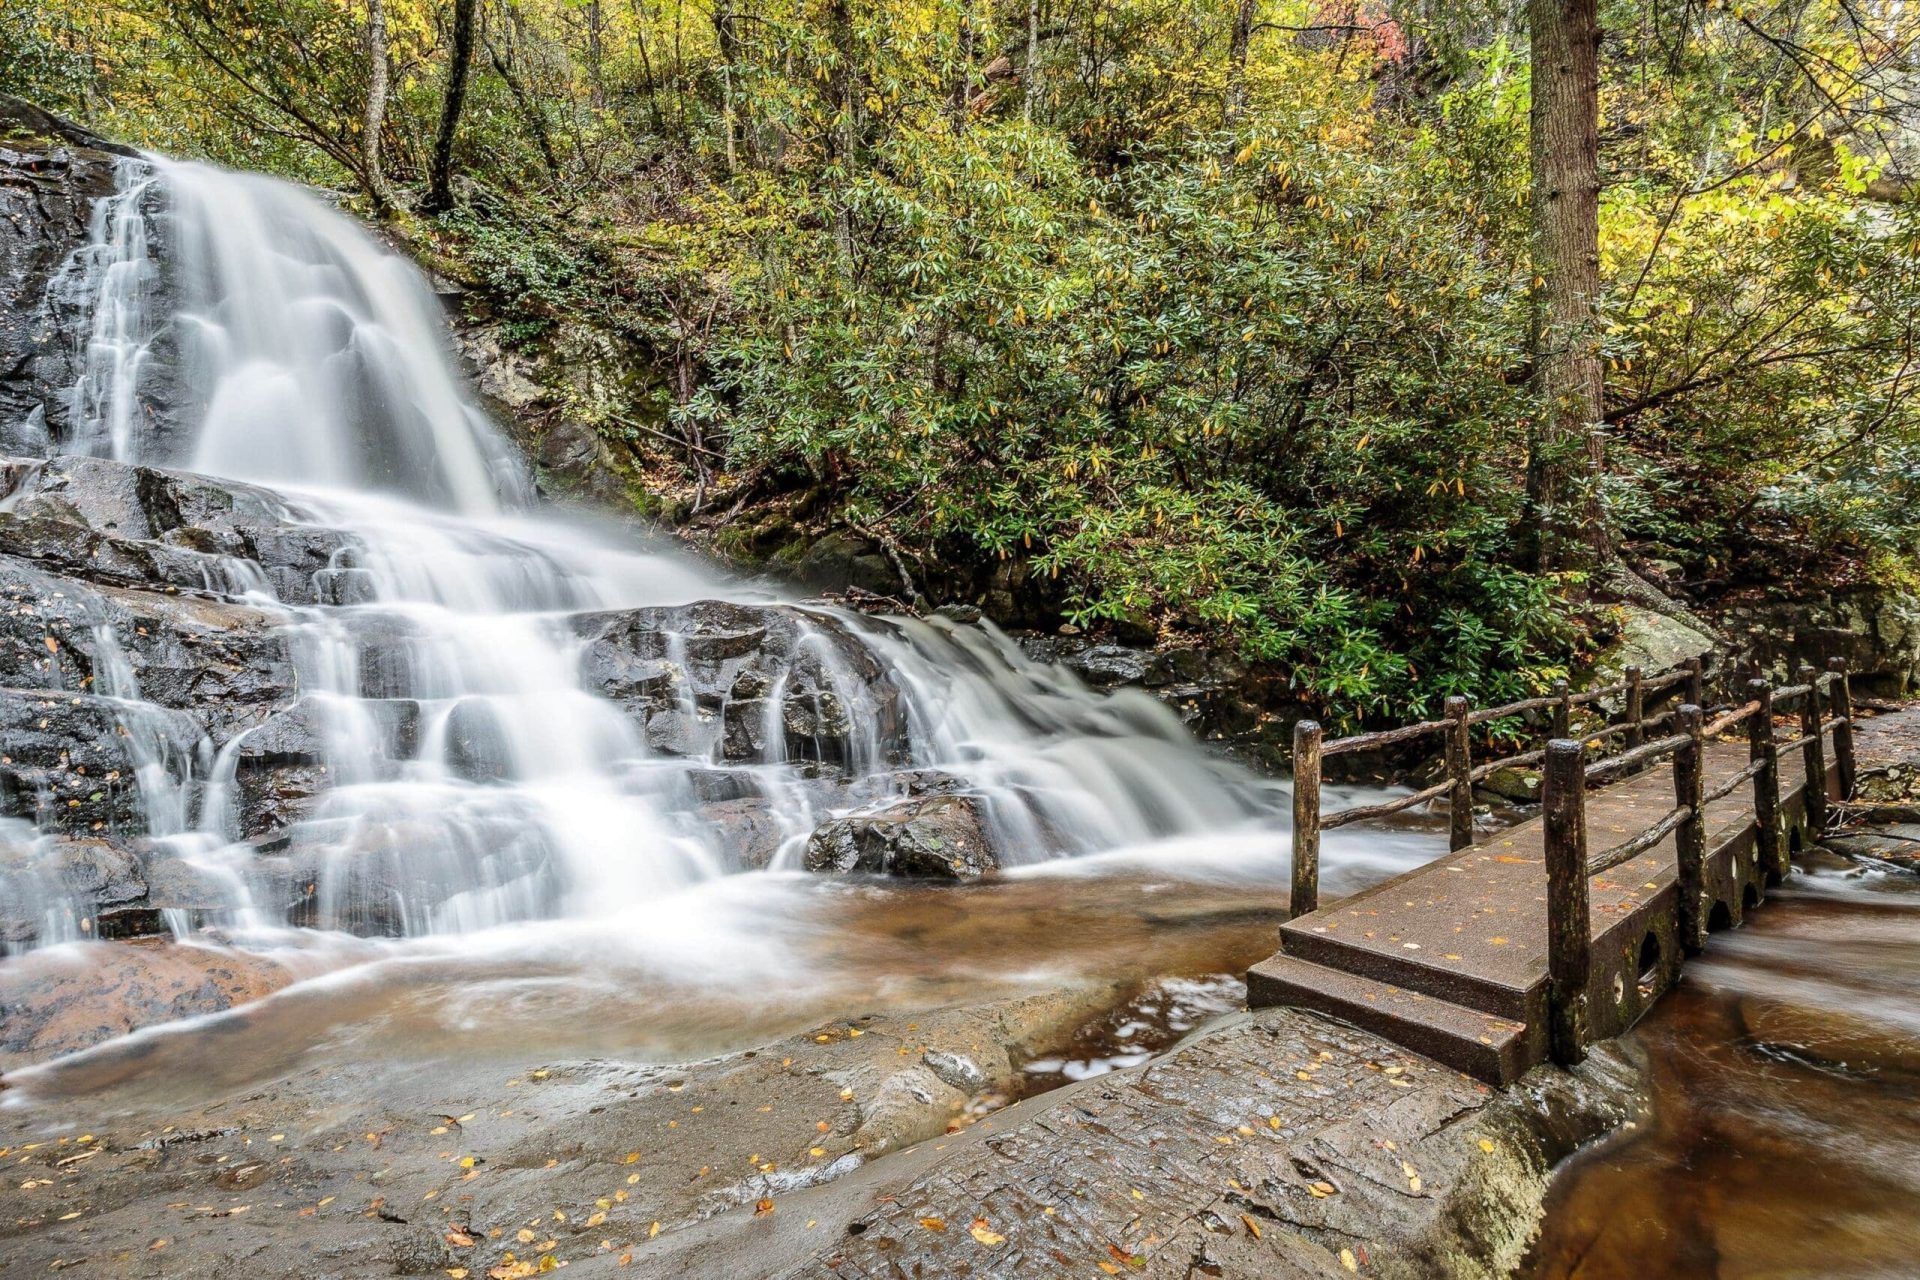 What should I know before going to the Great Smoky Mountains?